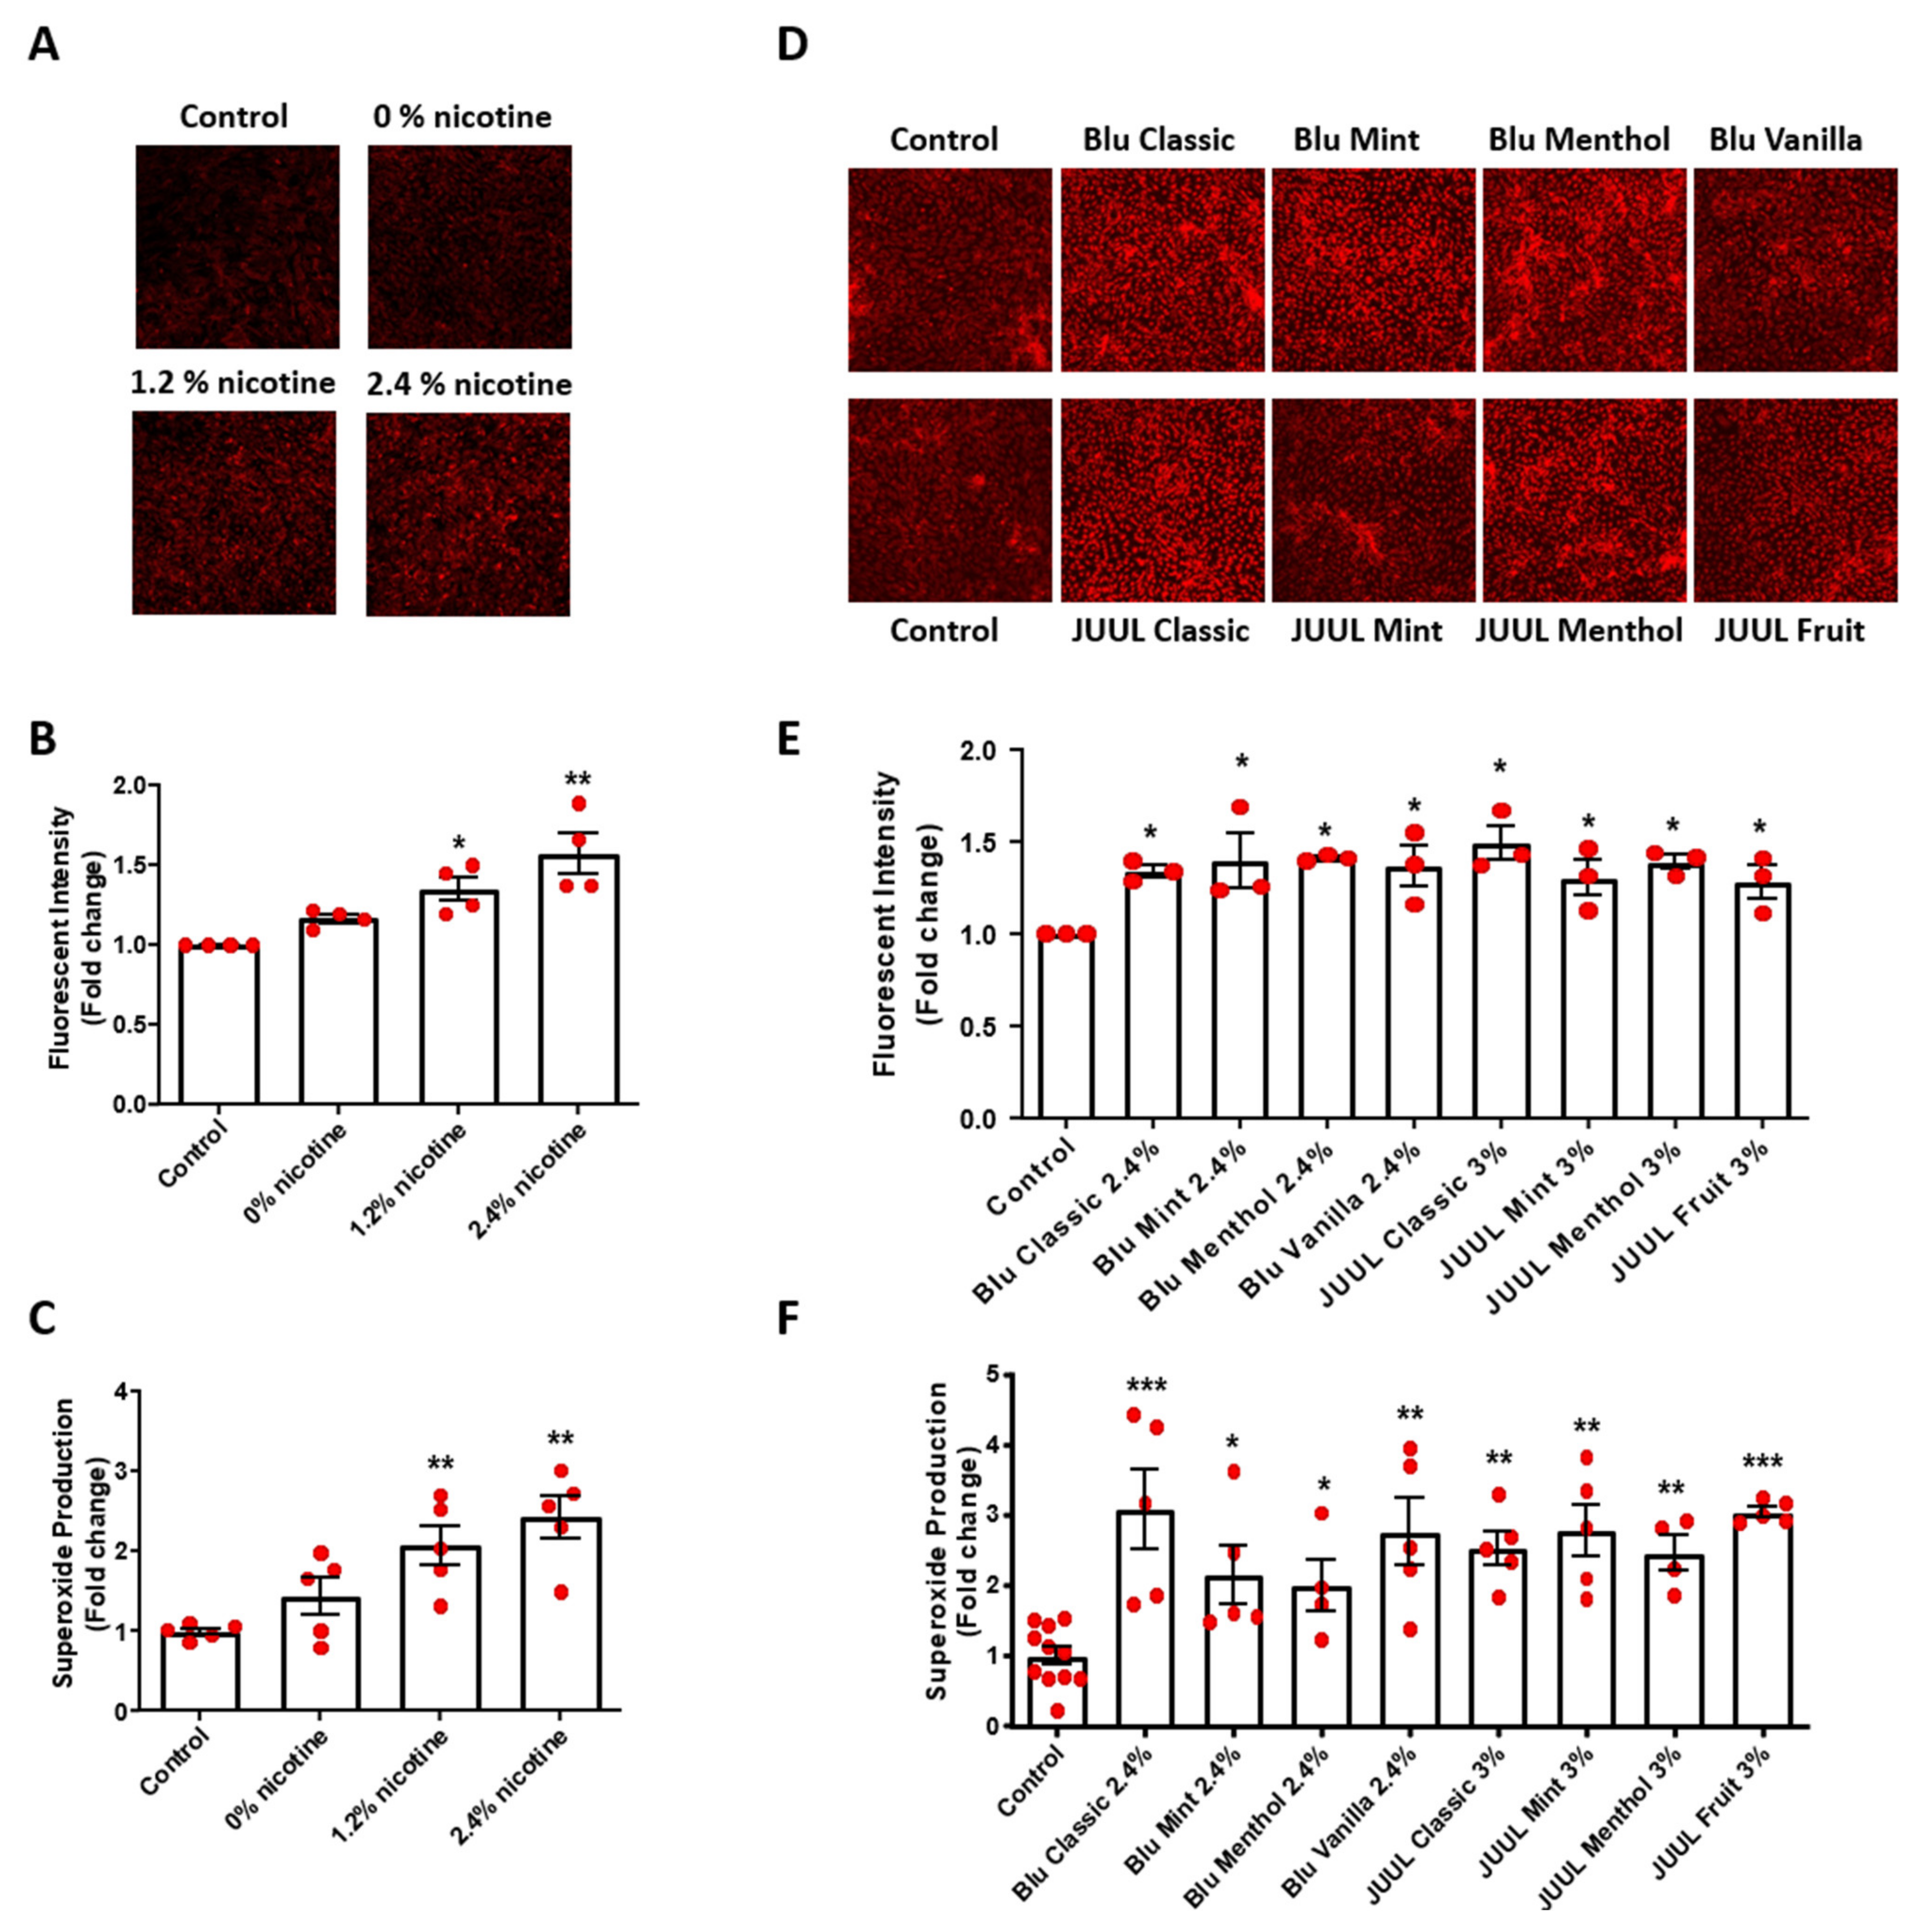 Antioxidants | Free Full-Text | Flavored and Nicotine-Containing E-Cigarettes  Induce Impaired Angiogenesis and Diabetic Wound Healing via Increased  Endothelial Oxidative Stress and Reduced NO Bioavailability